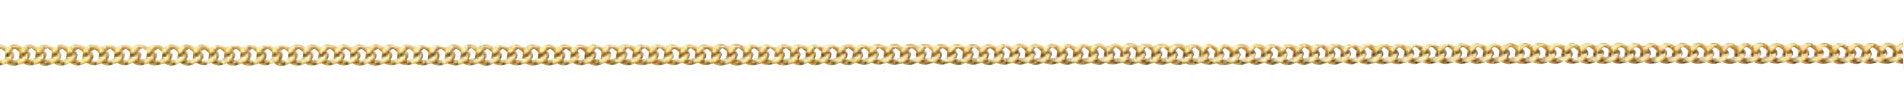 Gold Plated Chain with Clasp (Multiple Sizes) - Saint-Mike.org